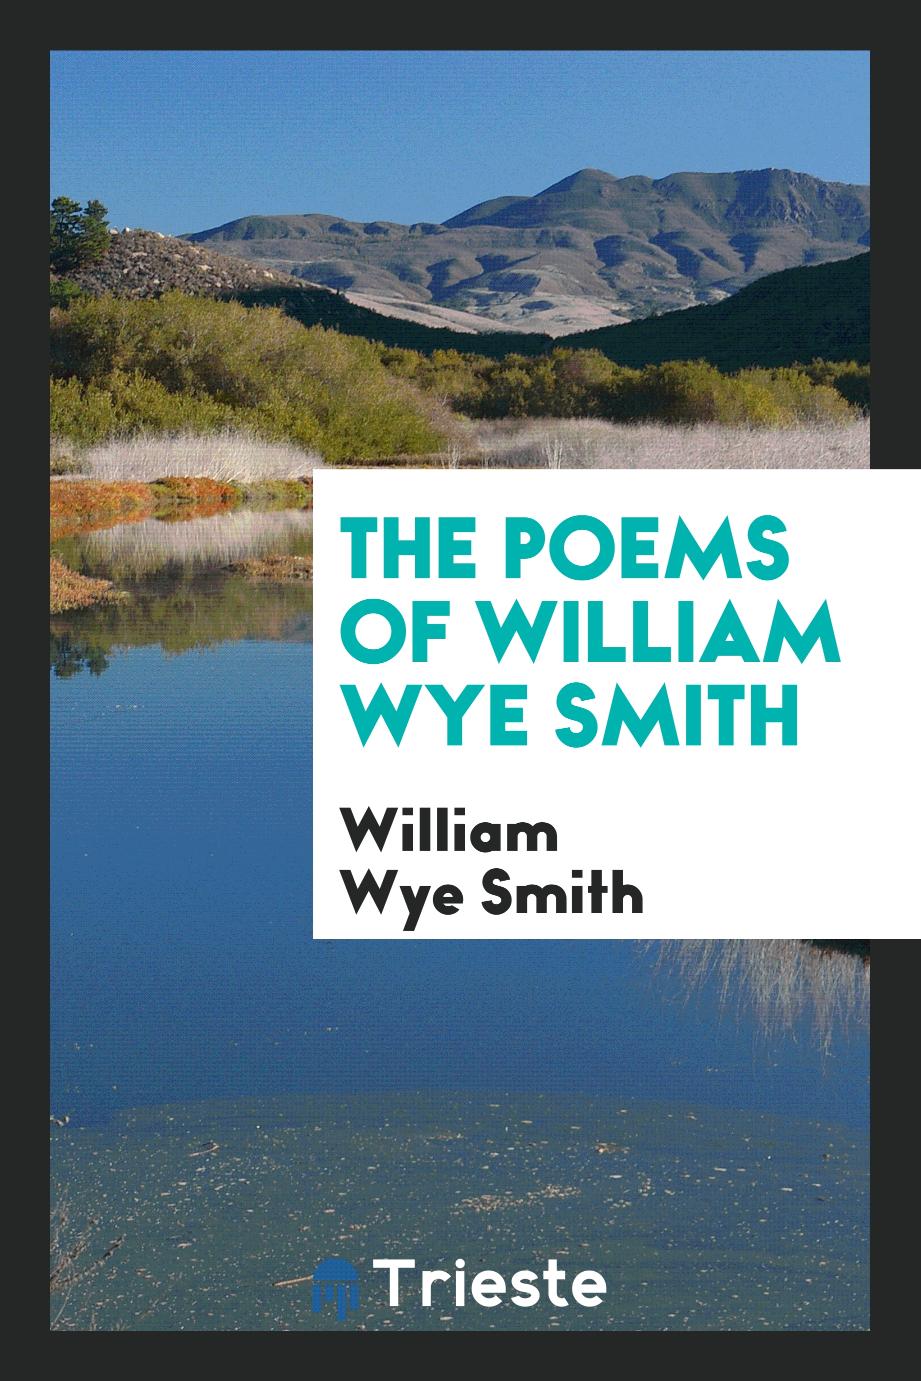 The poems of William Wye Smith